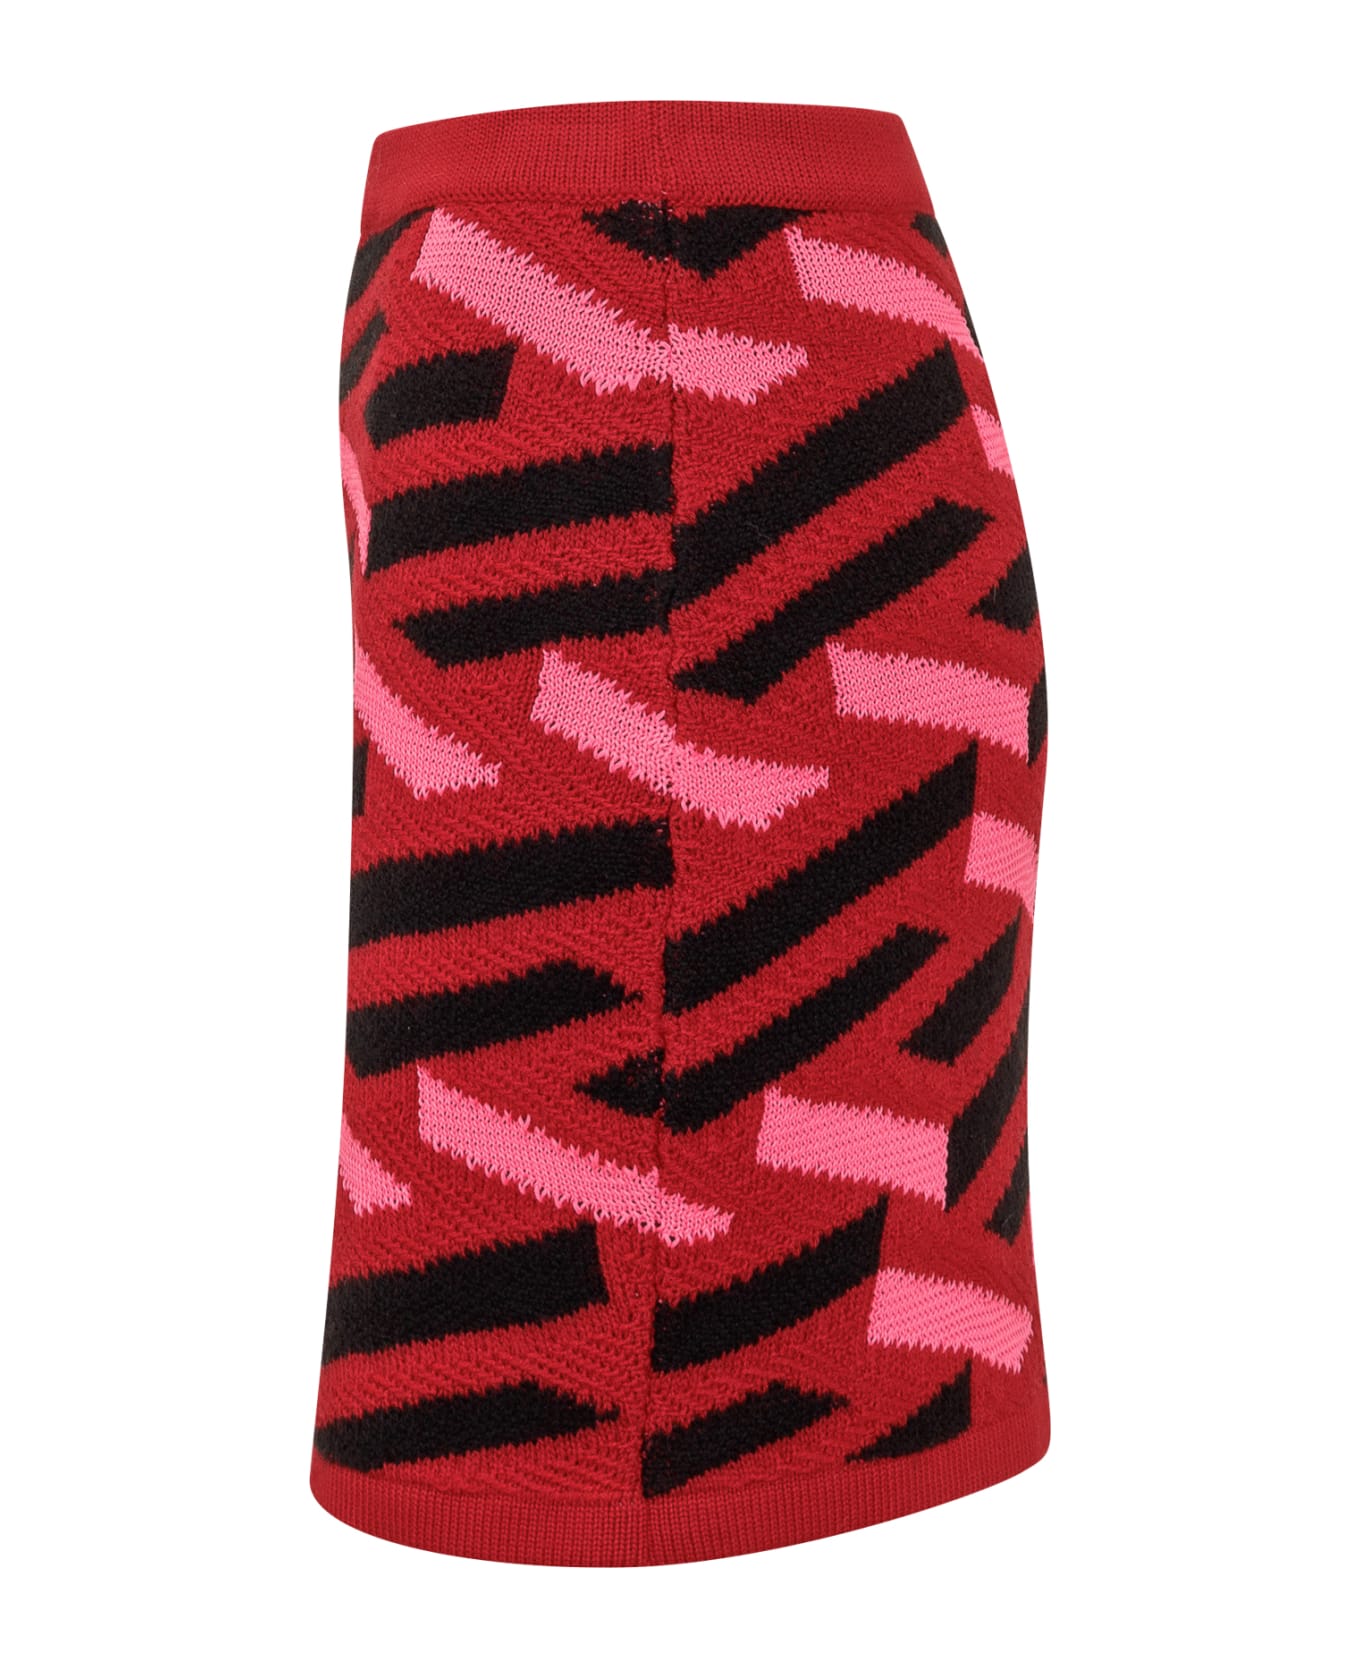 Versace Knitted Skirt - PARED RED FUXIA スカート